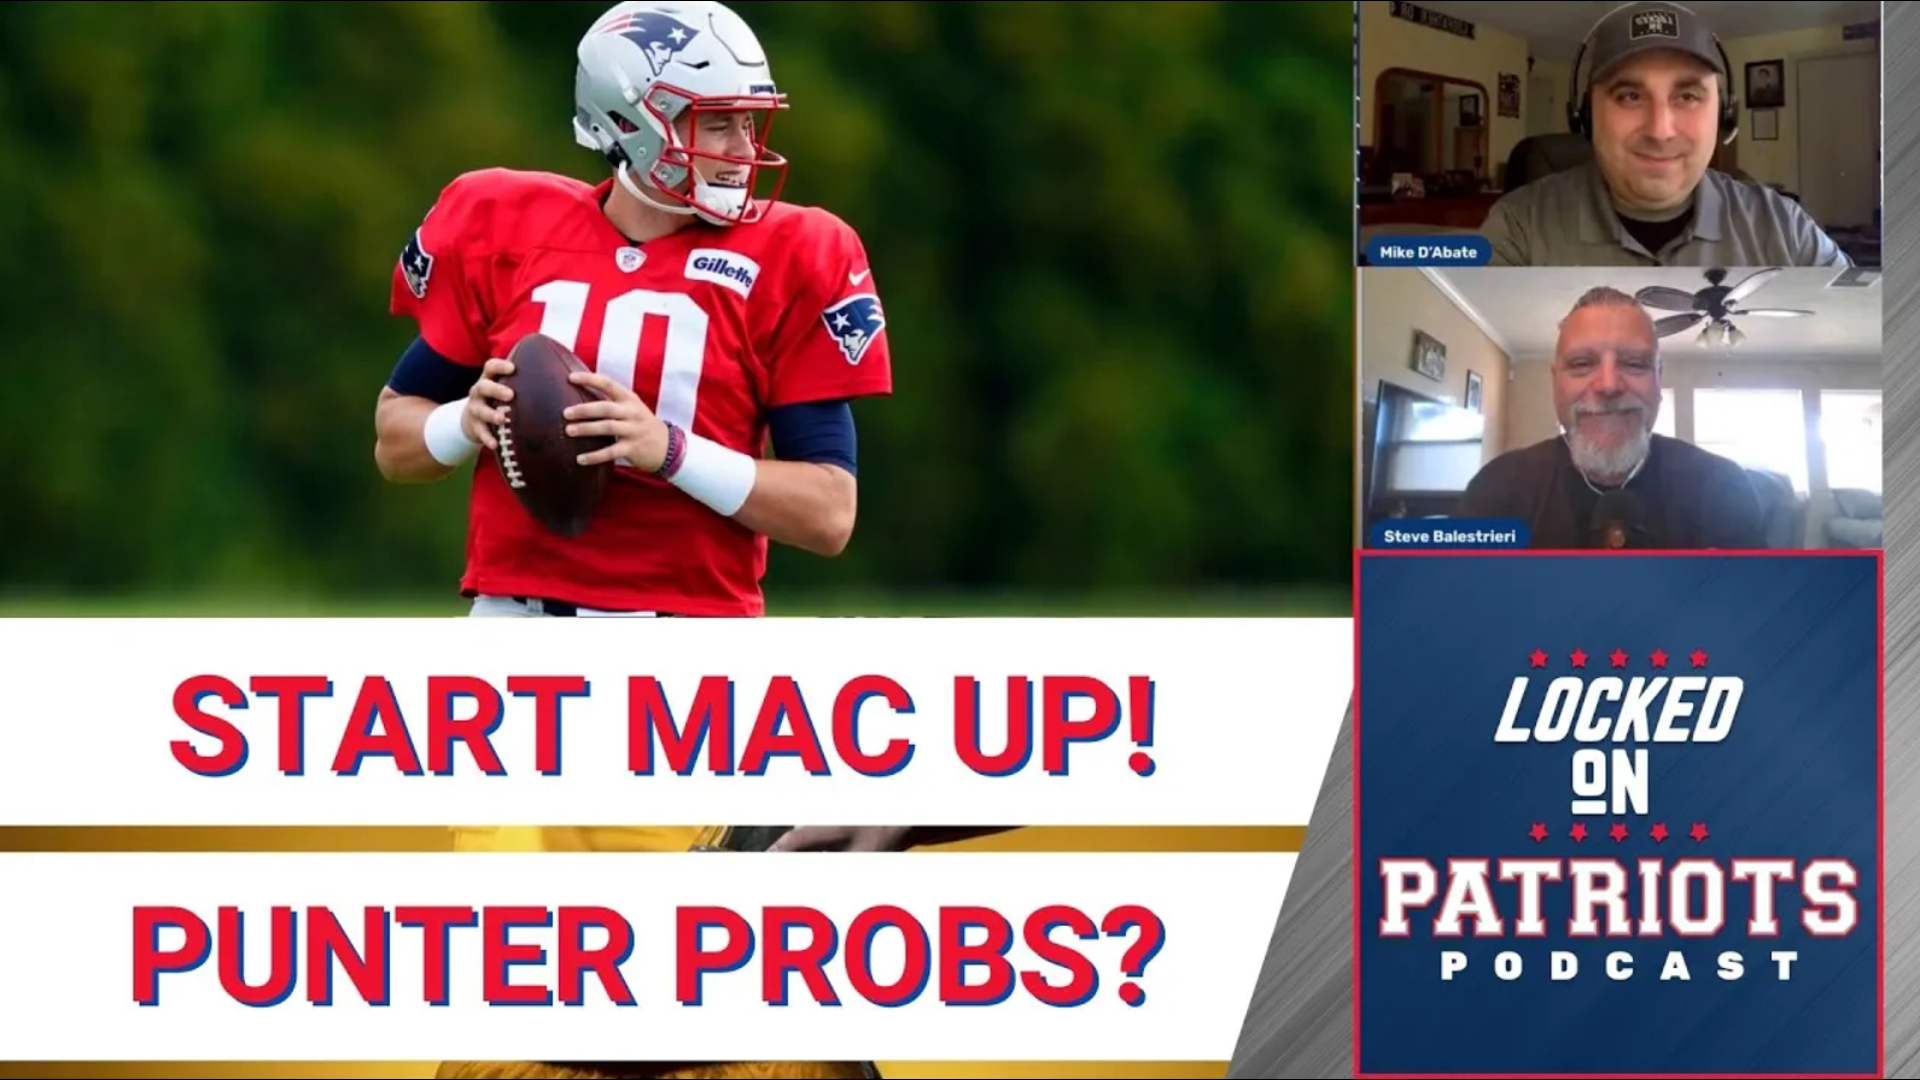 The controversy has been laid to rest …at least, for the week. The New England Patriots will start Mac Jones at quarterback on Sunday vs. the New York Jets.